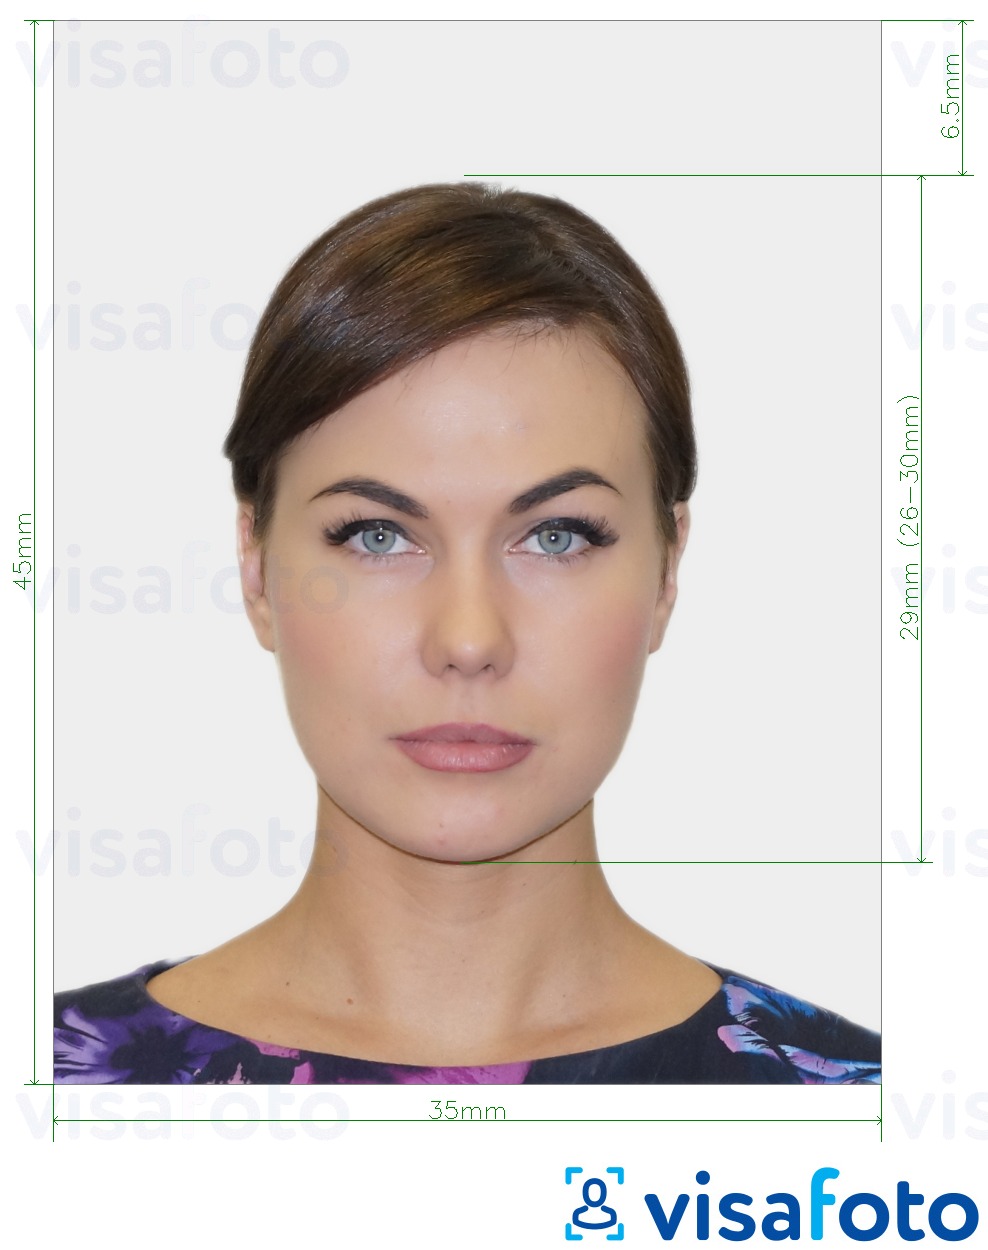 Example of photo for Dutch ID card 35x45 mm (3.5x4.5 cm) with exact size specification